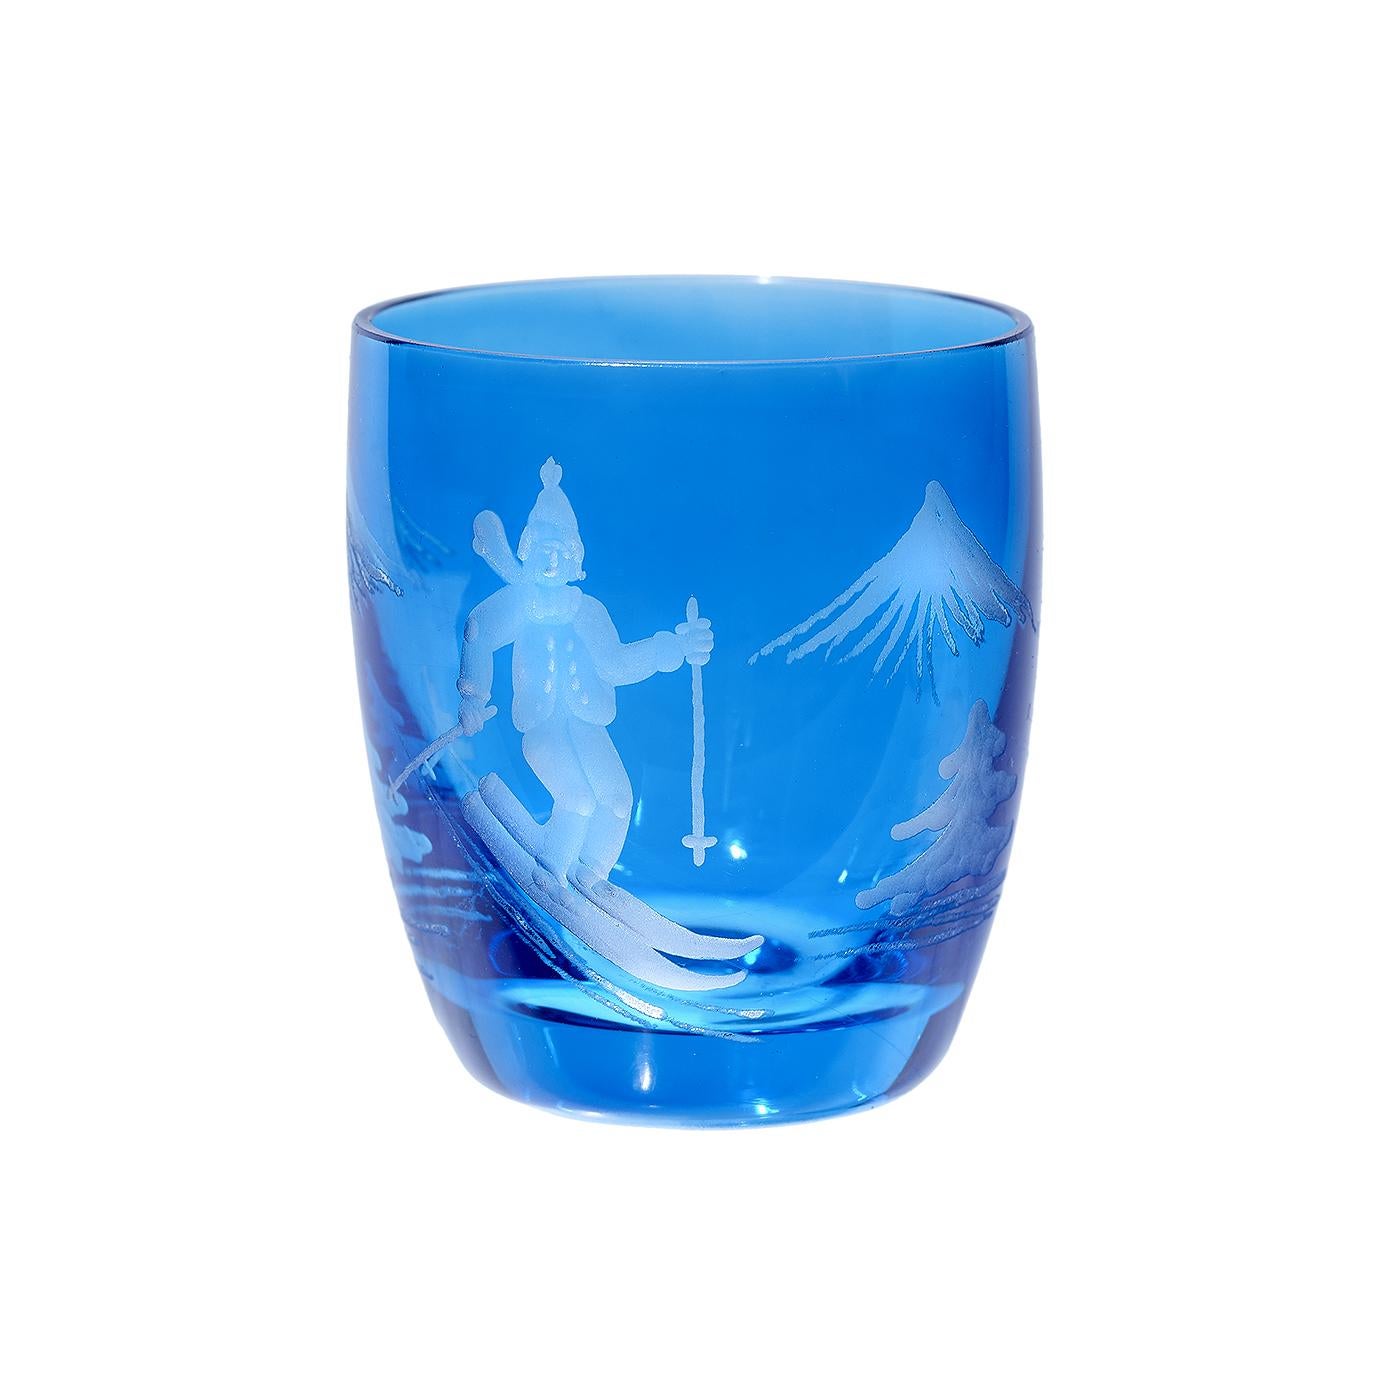 Set of six hand blown schnapps glasses in blue crystal with a hand-edged skier decor. The decor is a country style scene, showing a skier boy, trees and mountains. We recommend handwashing.